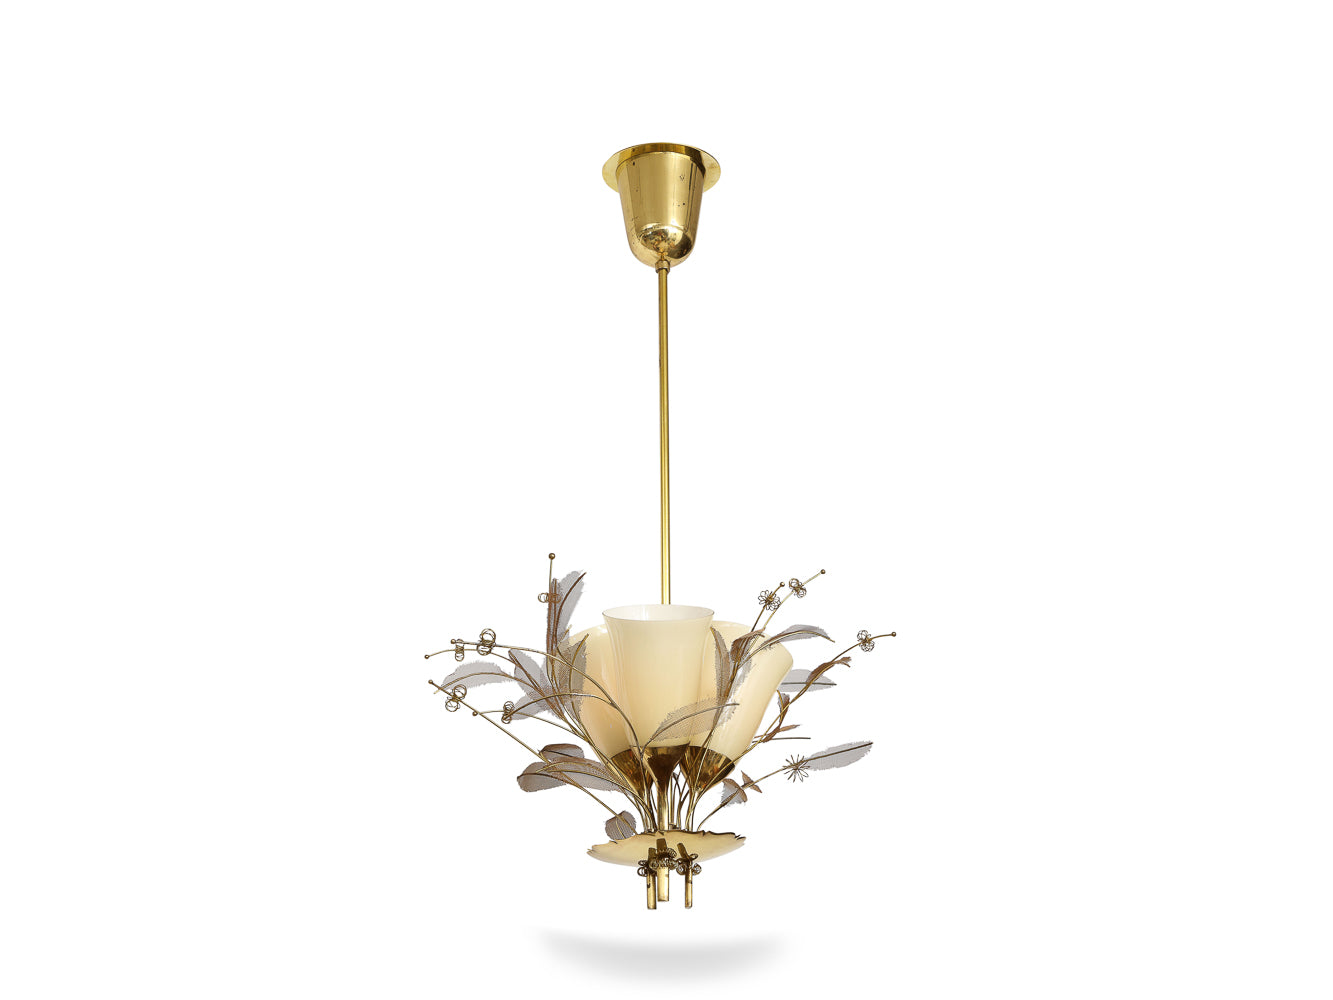 Model No. 9029/3 "Concerto" Chandeliers by Paavo Tynell for Taito Oy